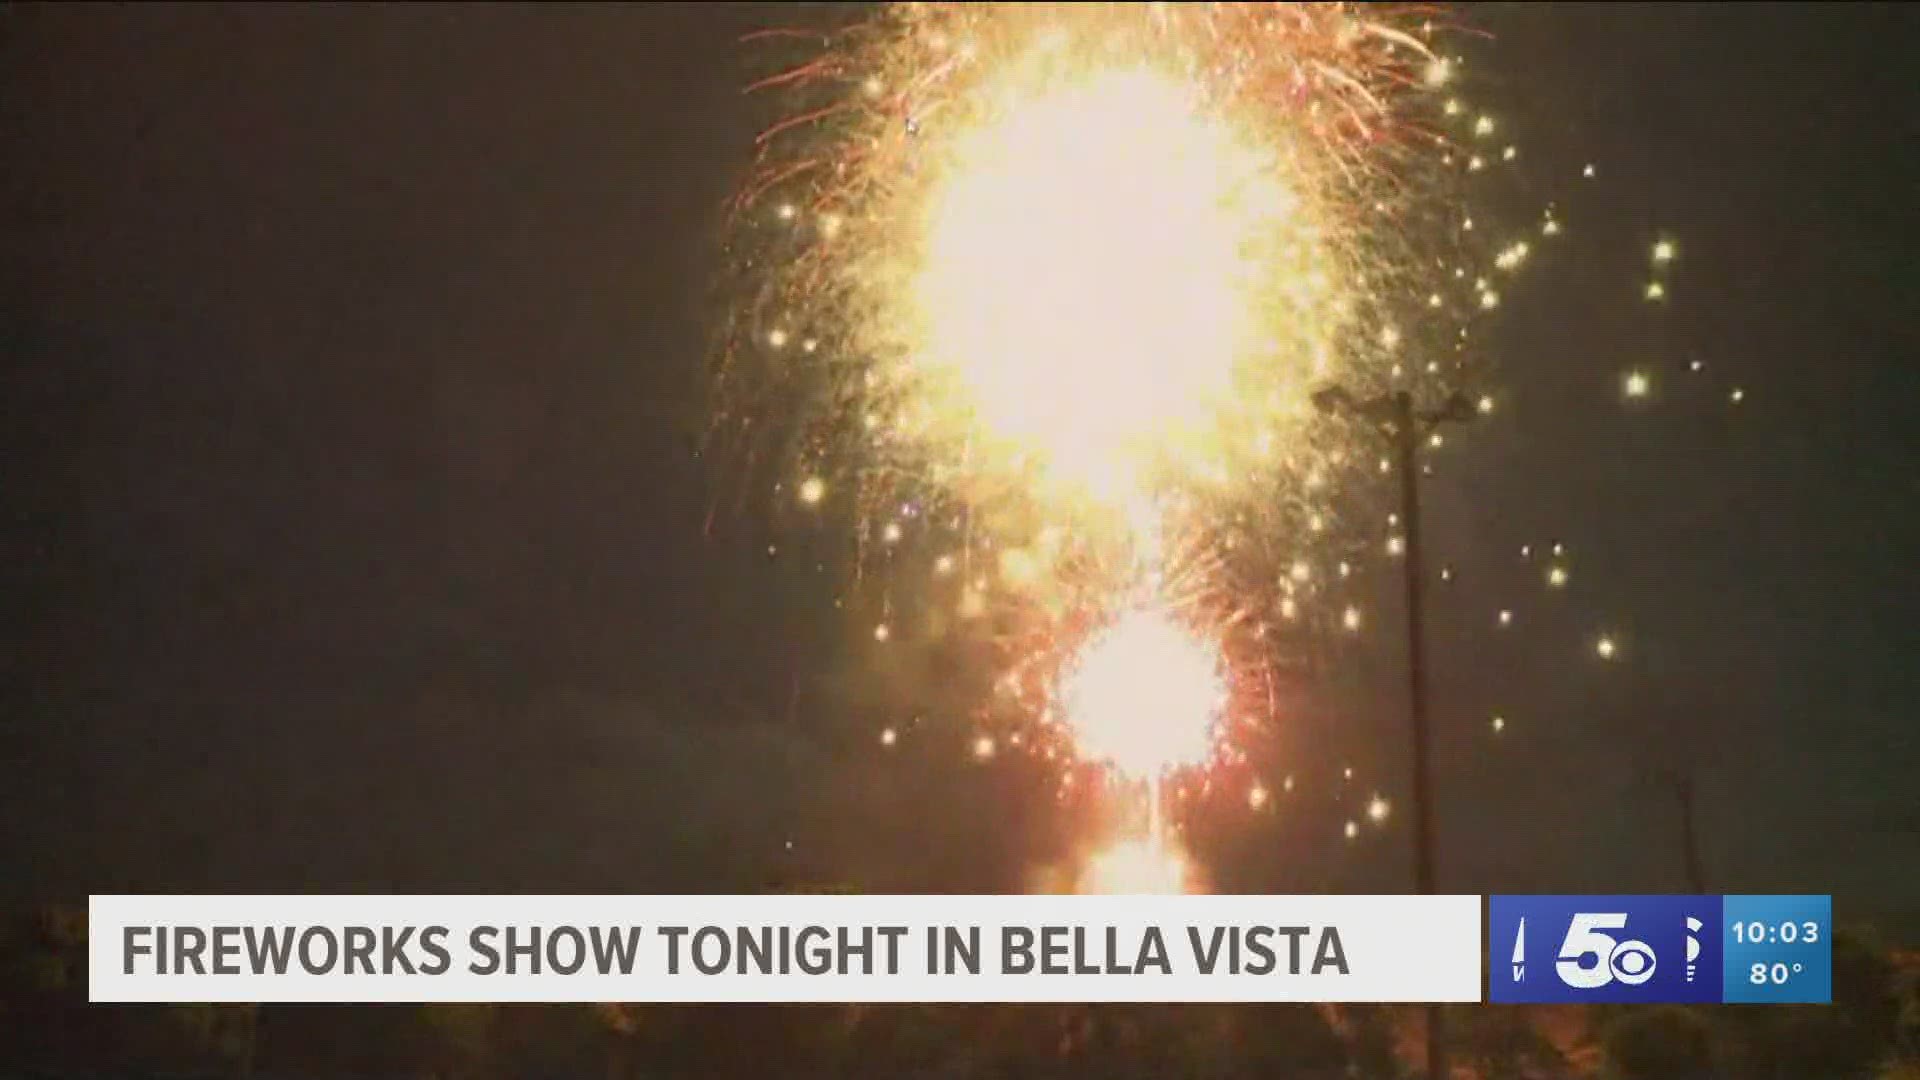 Families enjoy fireworks show in Bella Vista while practicing social